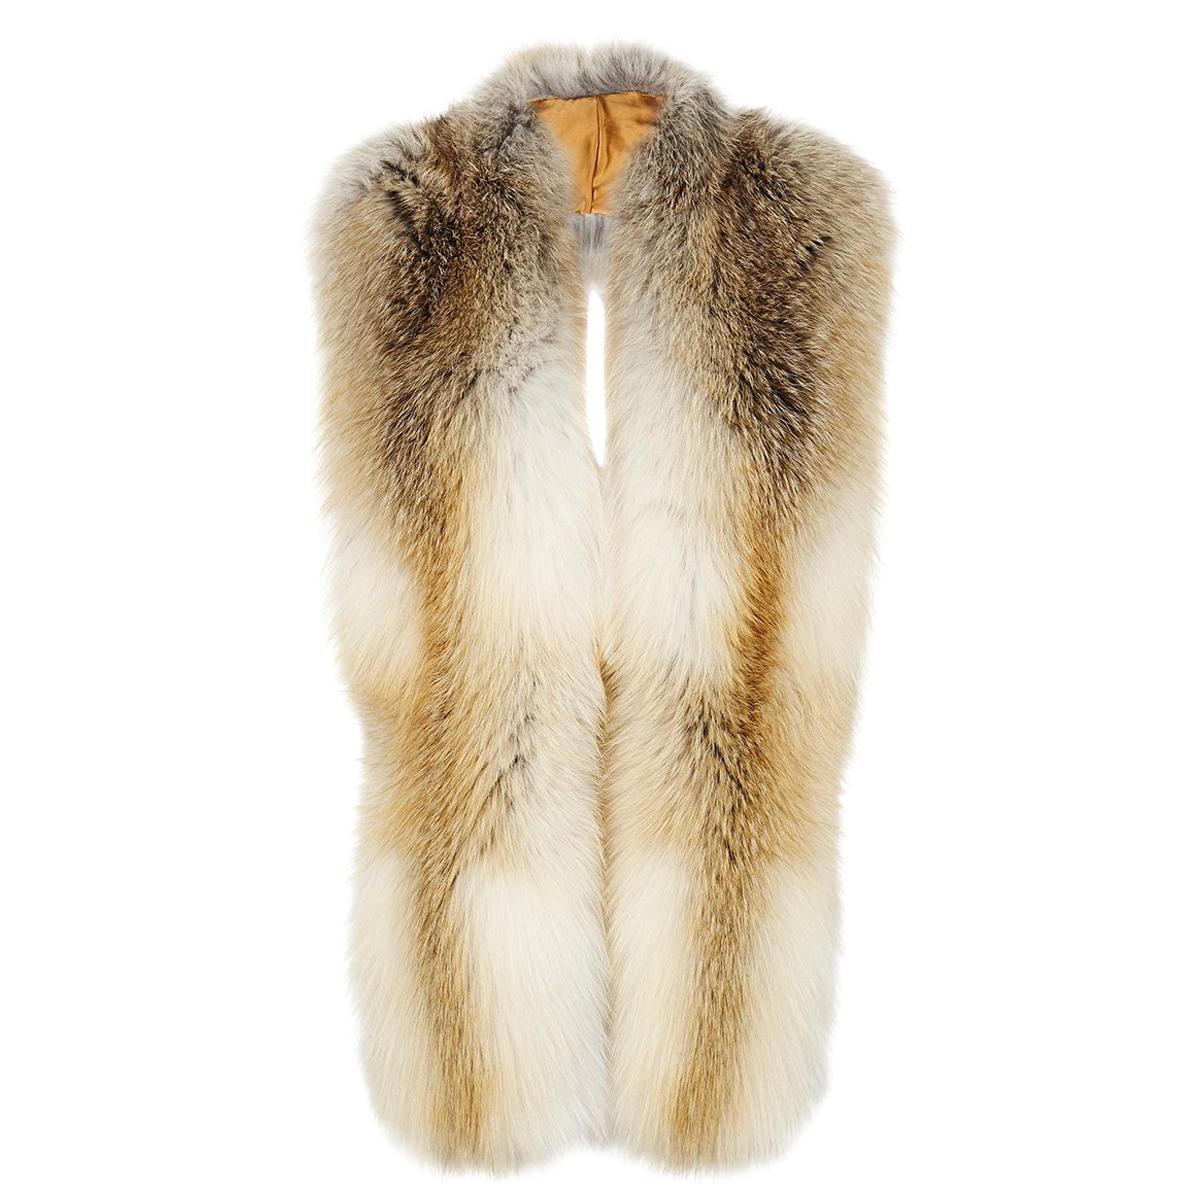 Verheyen London Legacy Stole Natural Golden Island Fox Fur 

This Natural Collection is Verheyen London’s versatile collection for country or city wear, crafted in the finest and highest quality origin assured natural fox.  A structured design to